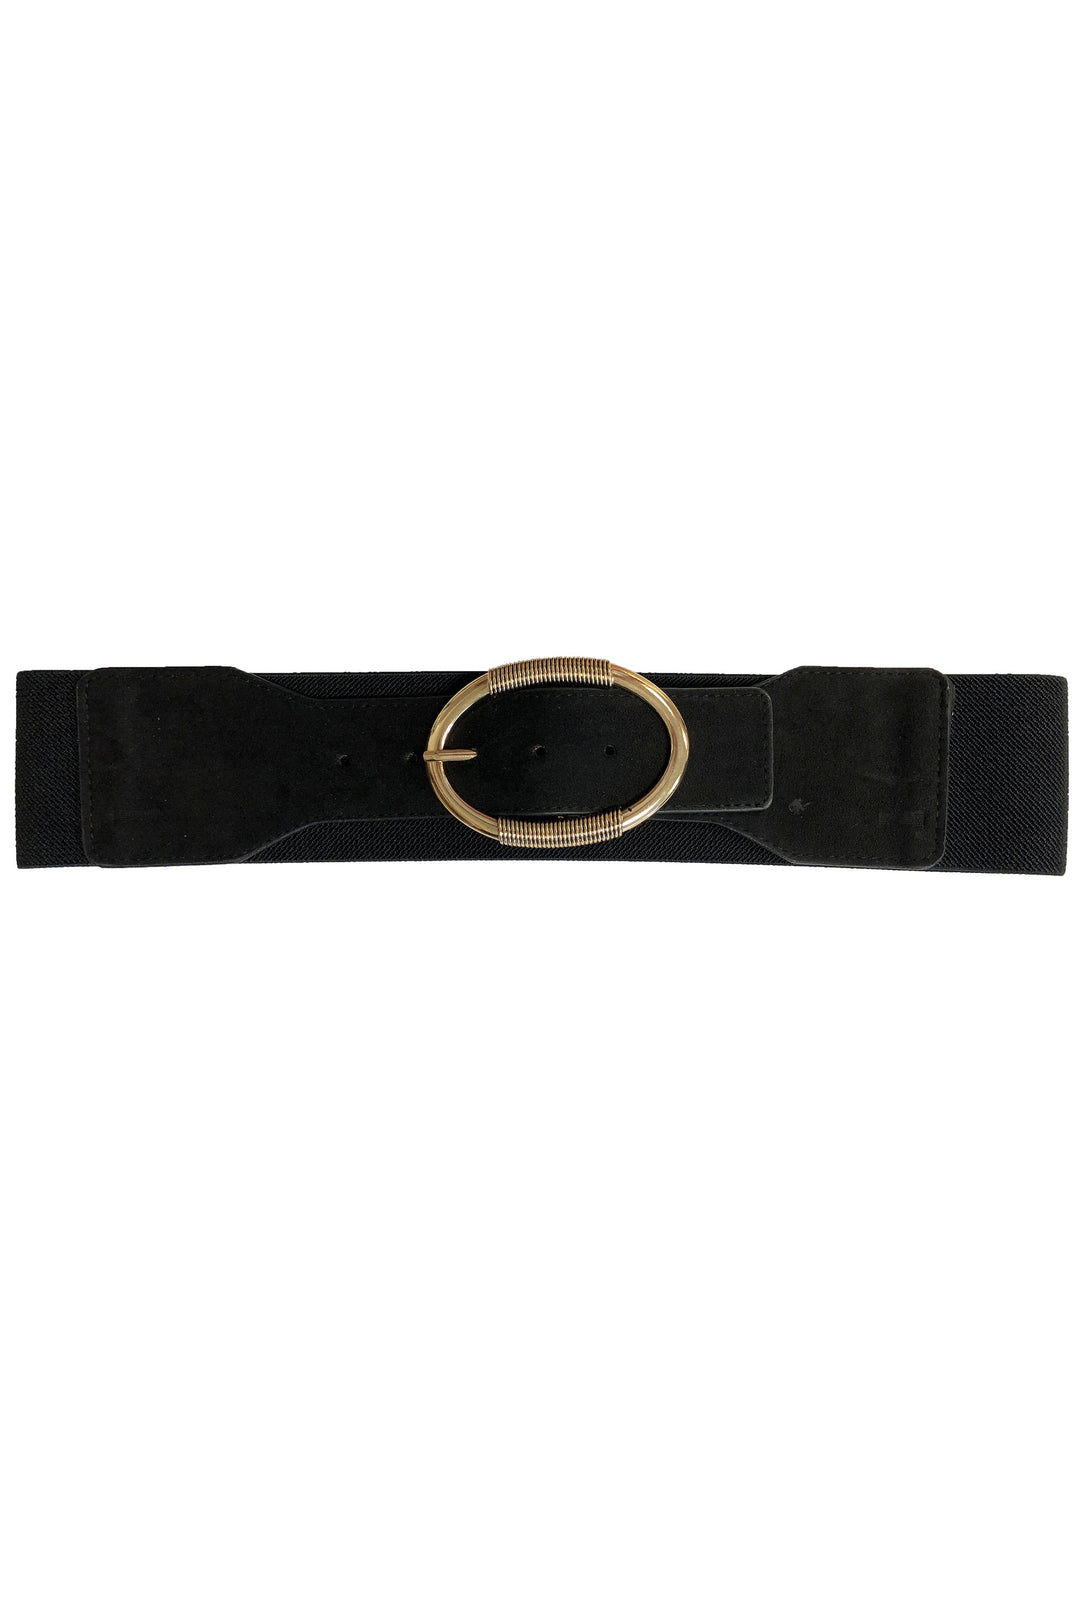 Its matte gold and black combination adds a touch of sophistication to any look.